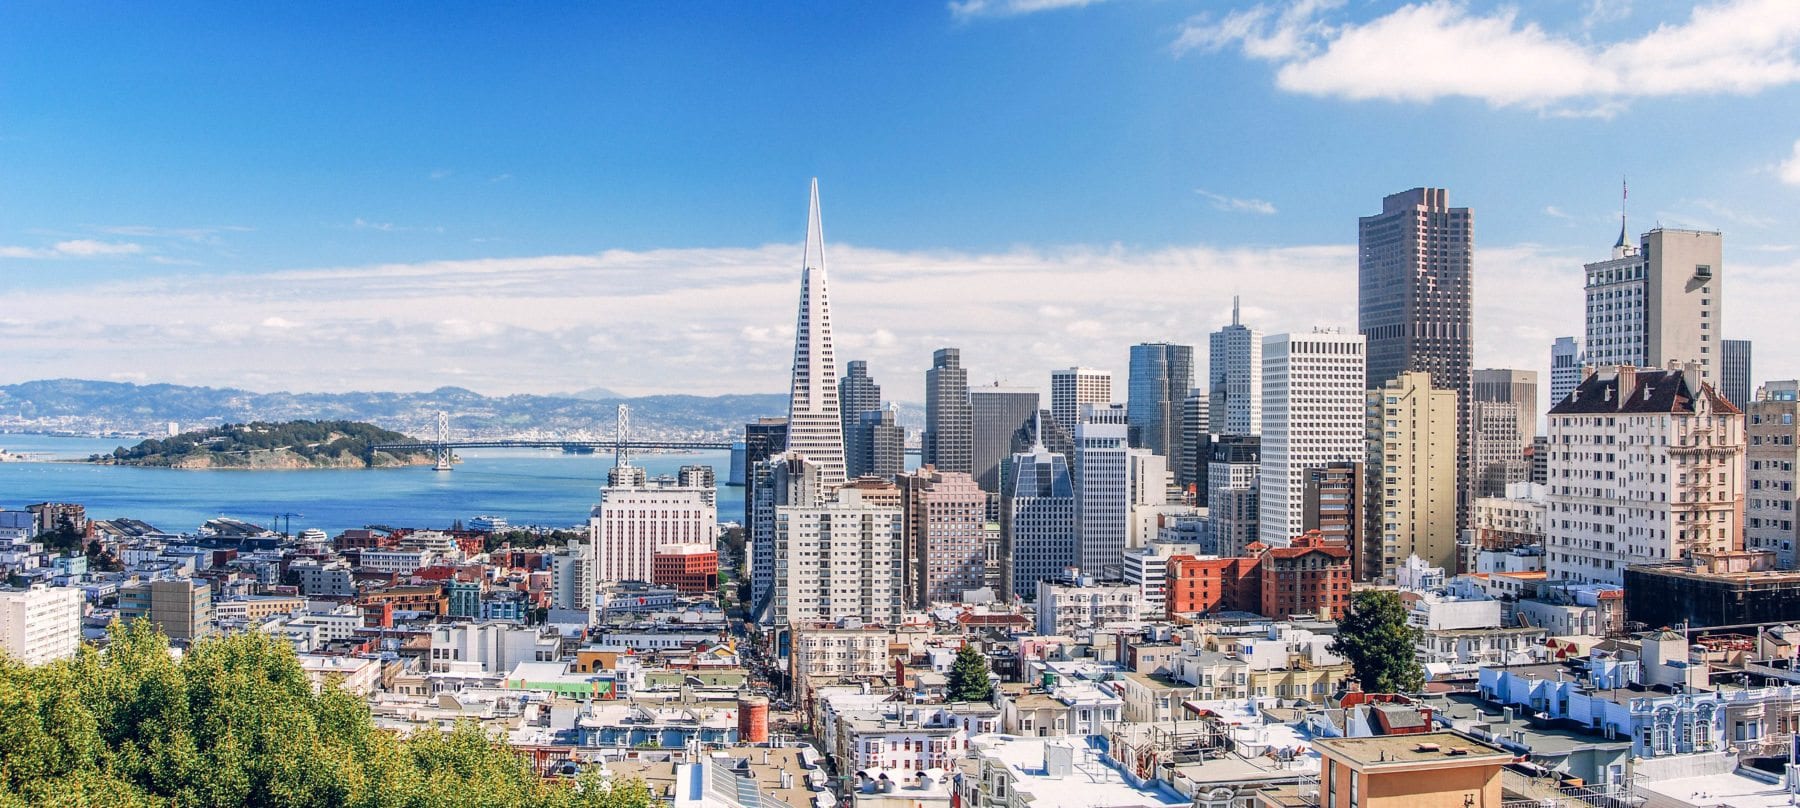 9 Tips to Buying San Francisco Real Estate Without Breaking Your Budget